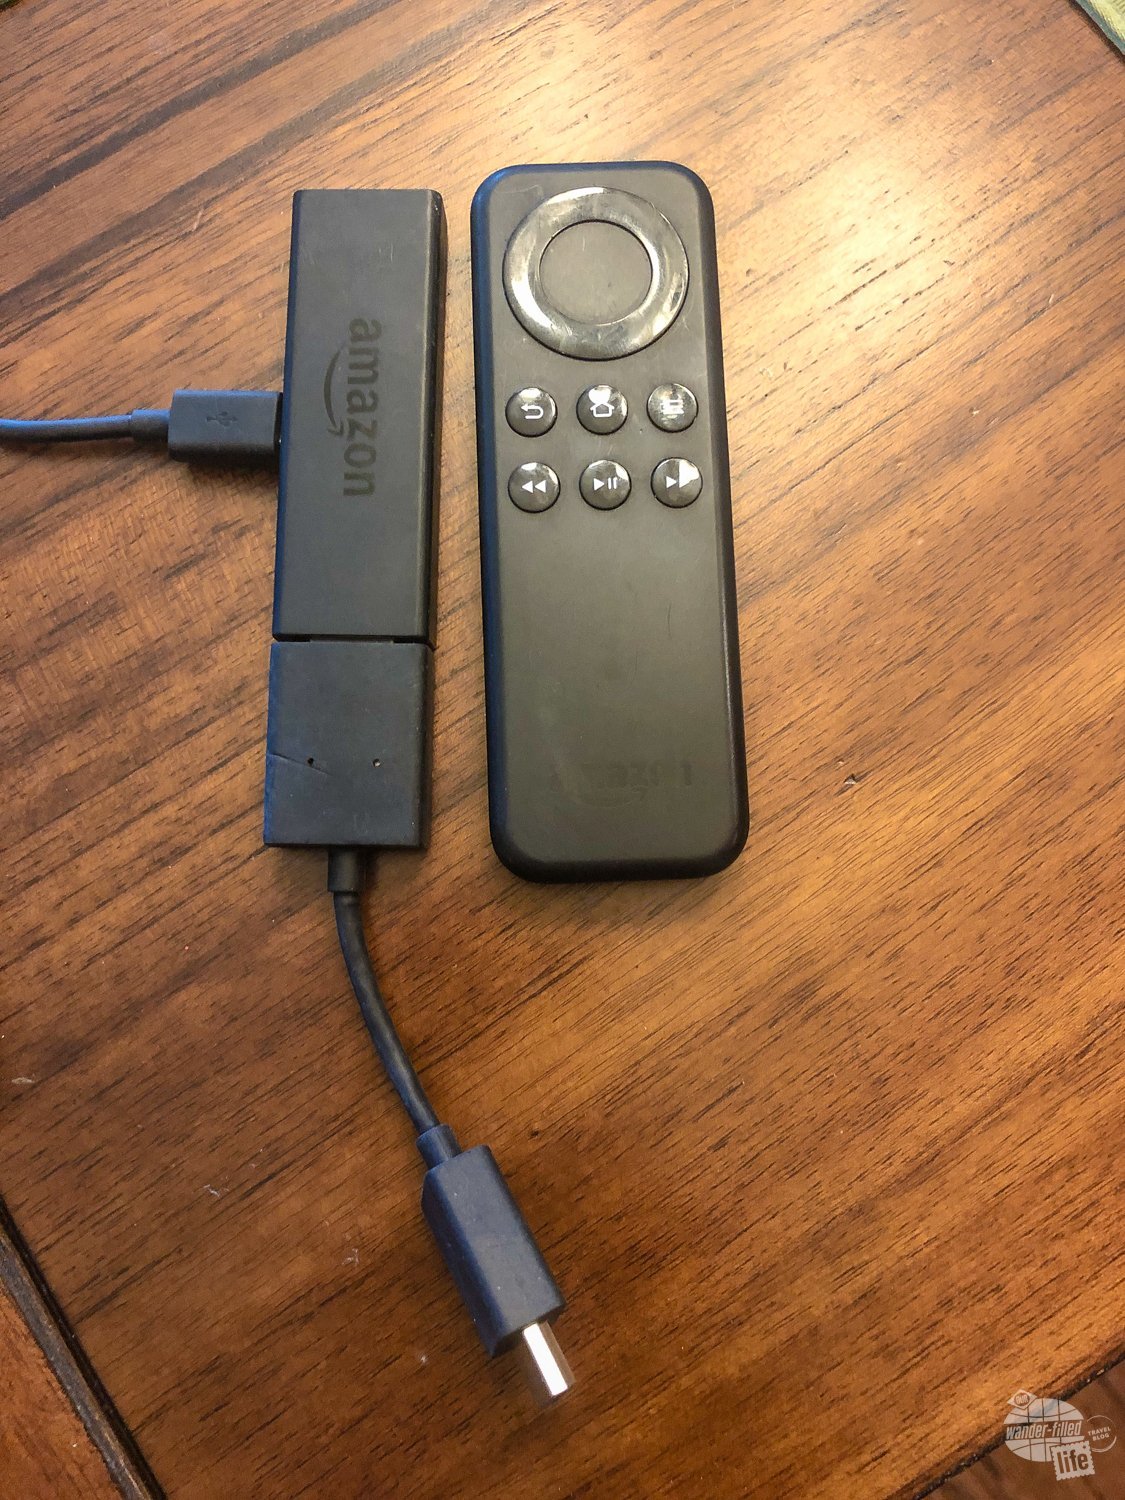 The Amazon Fire Stick is great for traveling with or without your camper. Definitely one of our most-loved holiday gifts. 